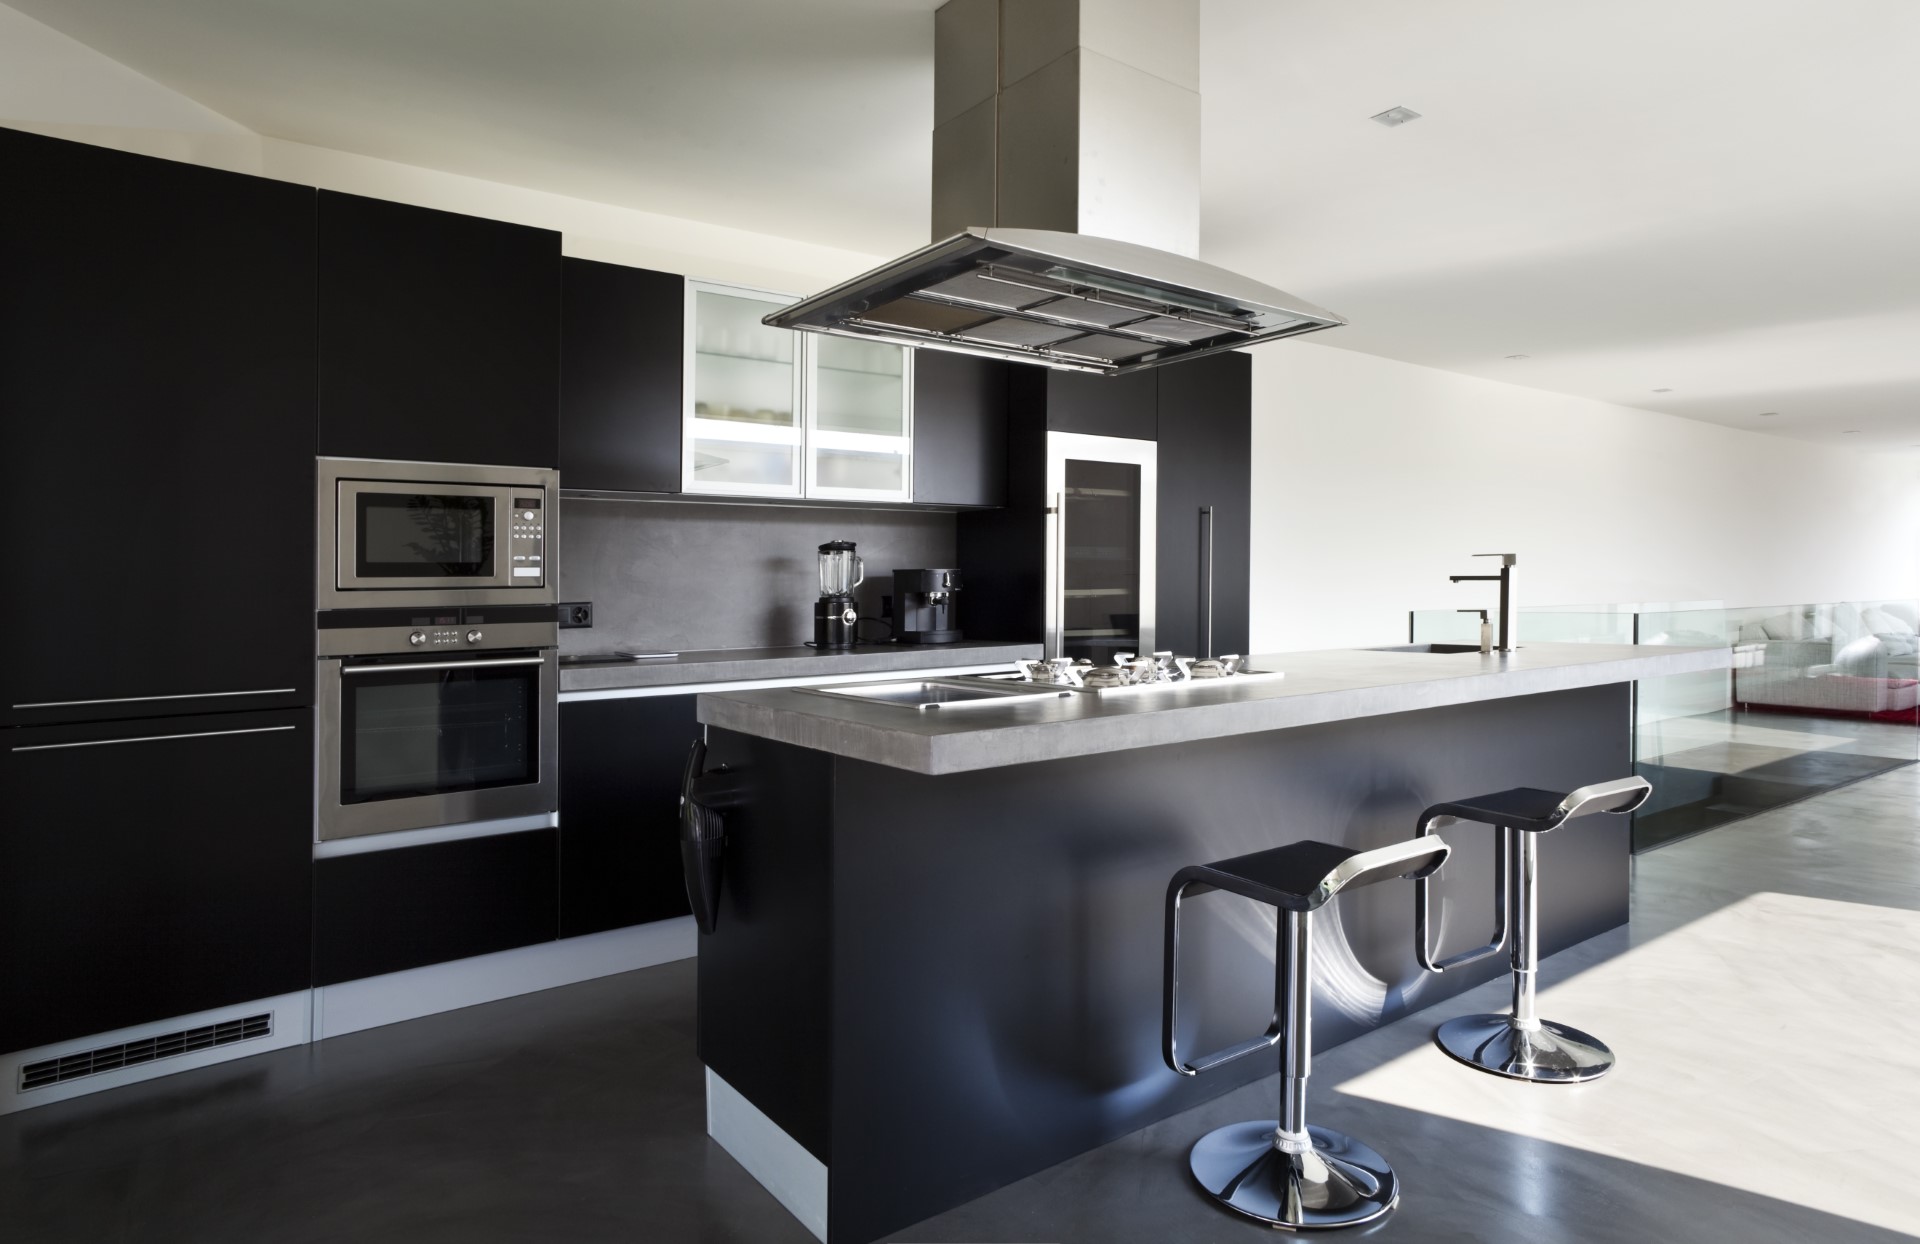 Dark cabinets carry the functionality of being low maintenance and seemingly always looking good. They're great at hiding finger prints and when you add in stainless steel, it makes it shine.